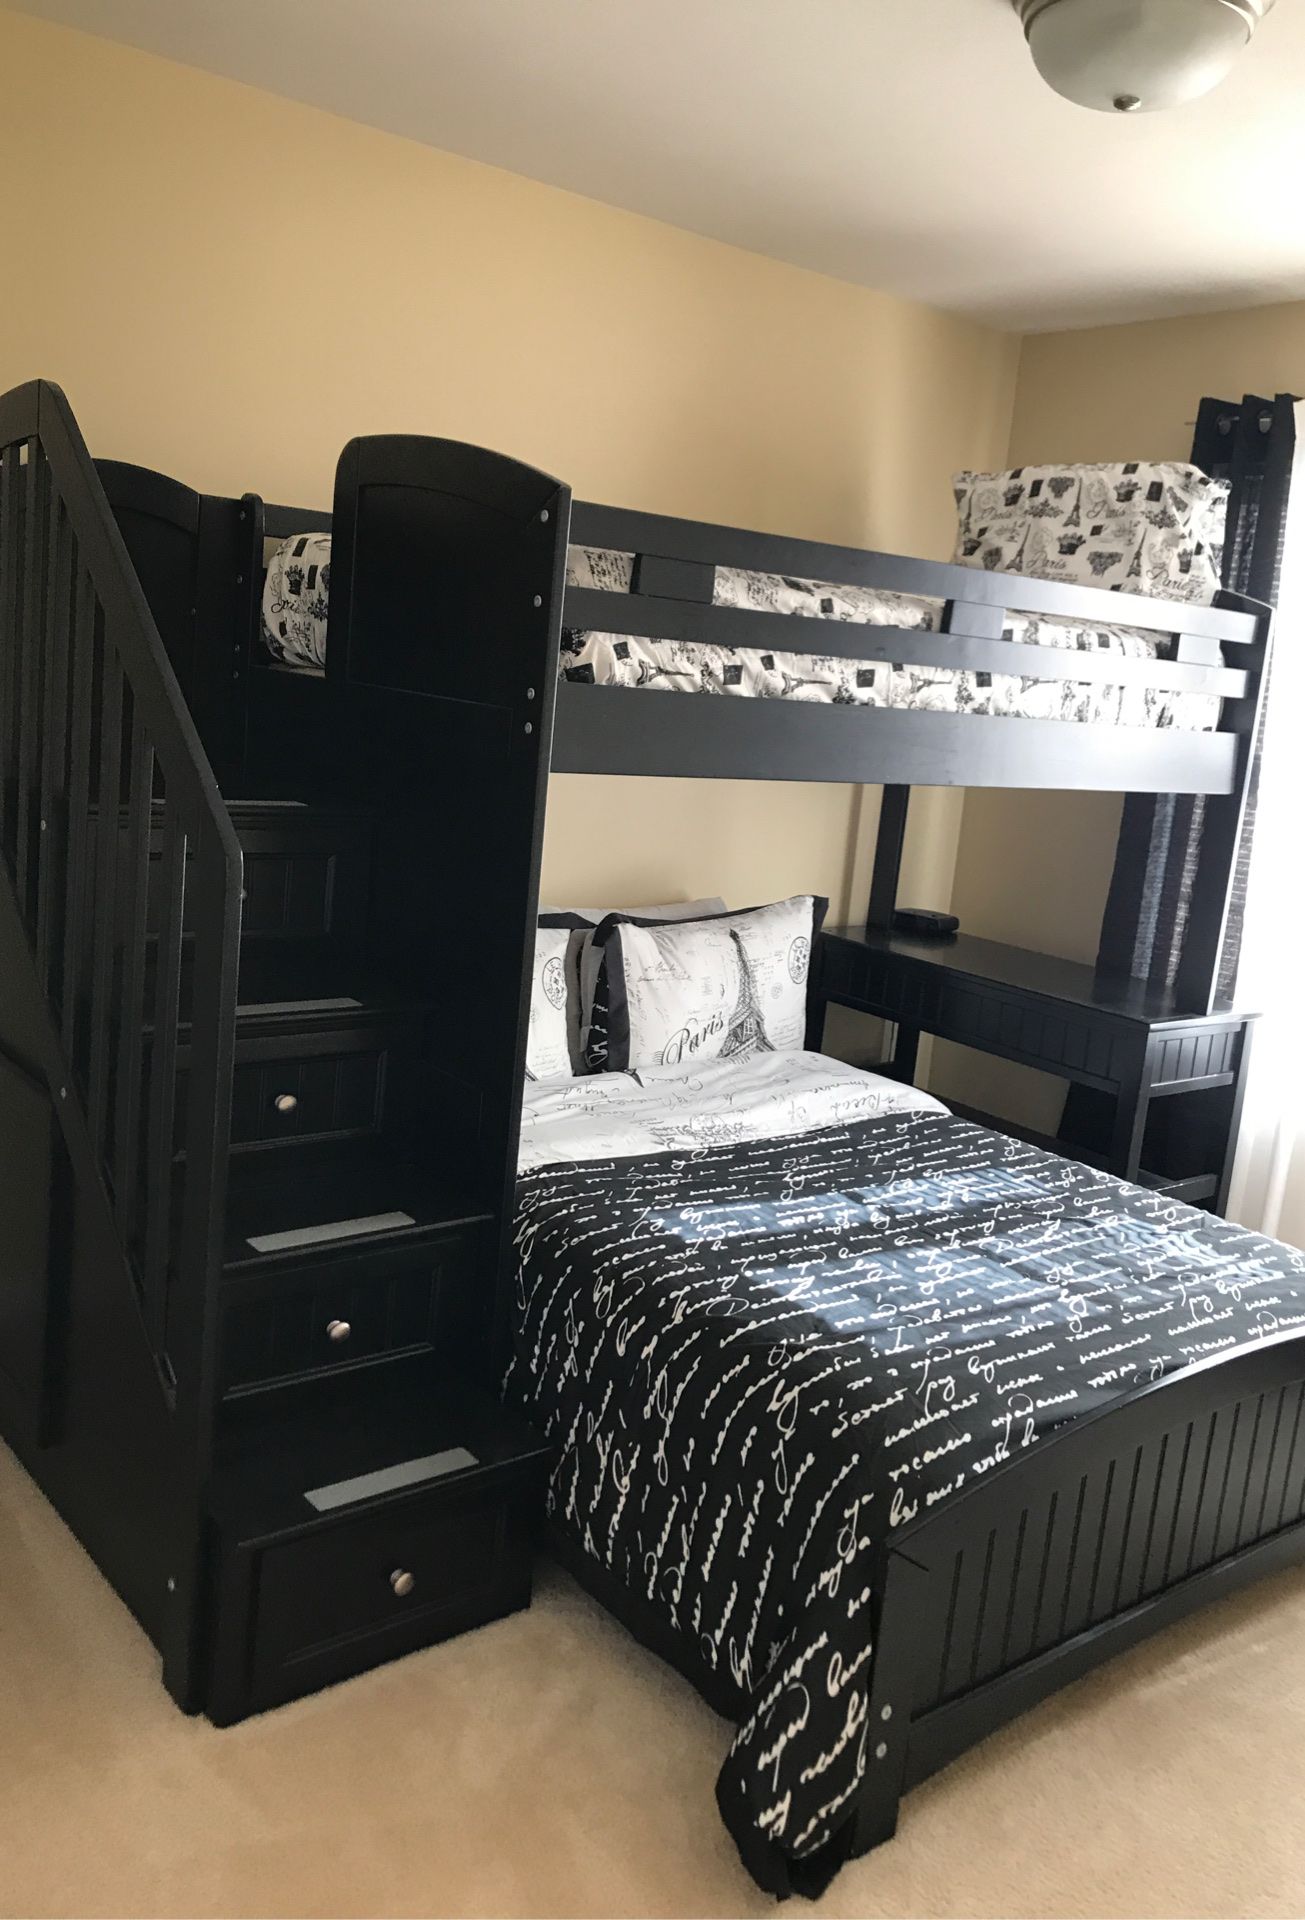 Bunk bed, with storage, and swivel chair, includes 4 drawers in steps for clothing storage. $899